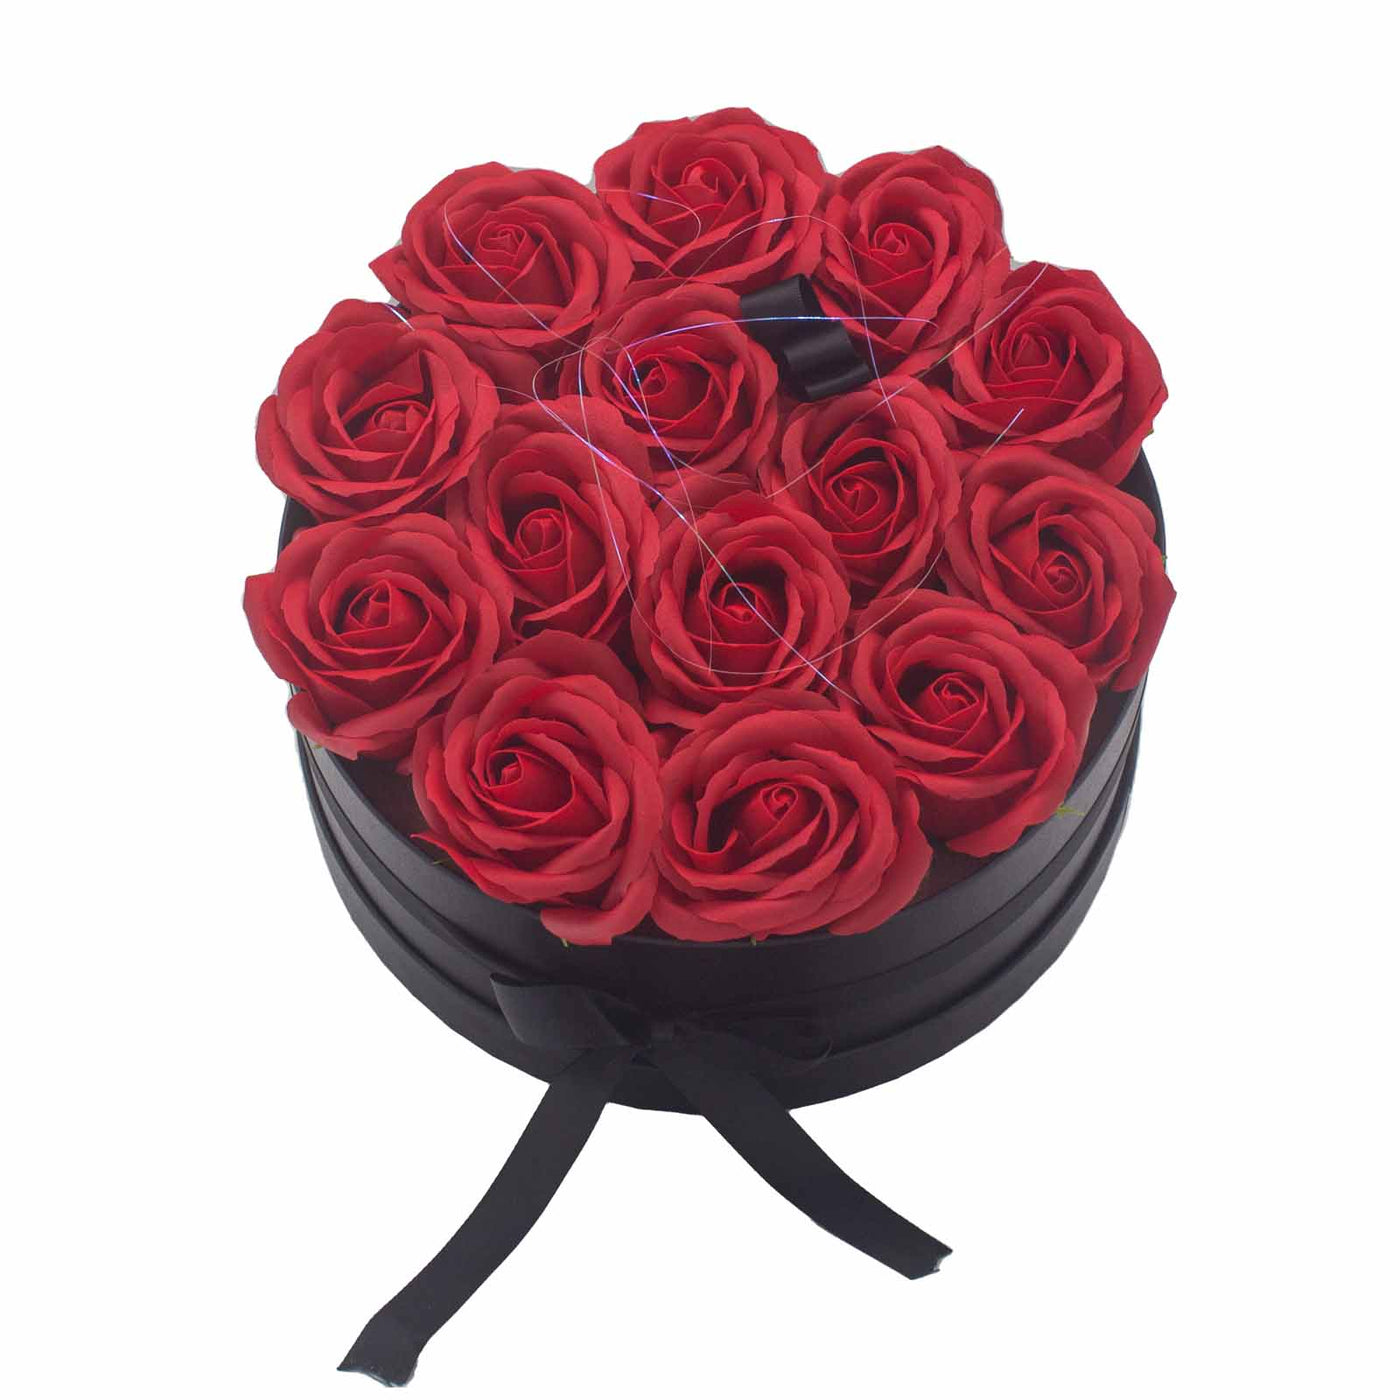 Body Soap Fragranced Flowers Gift Rose Bouquet - 14 Red Roses In Round Gift Box.